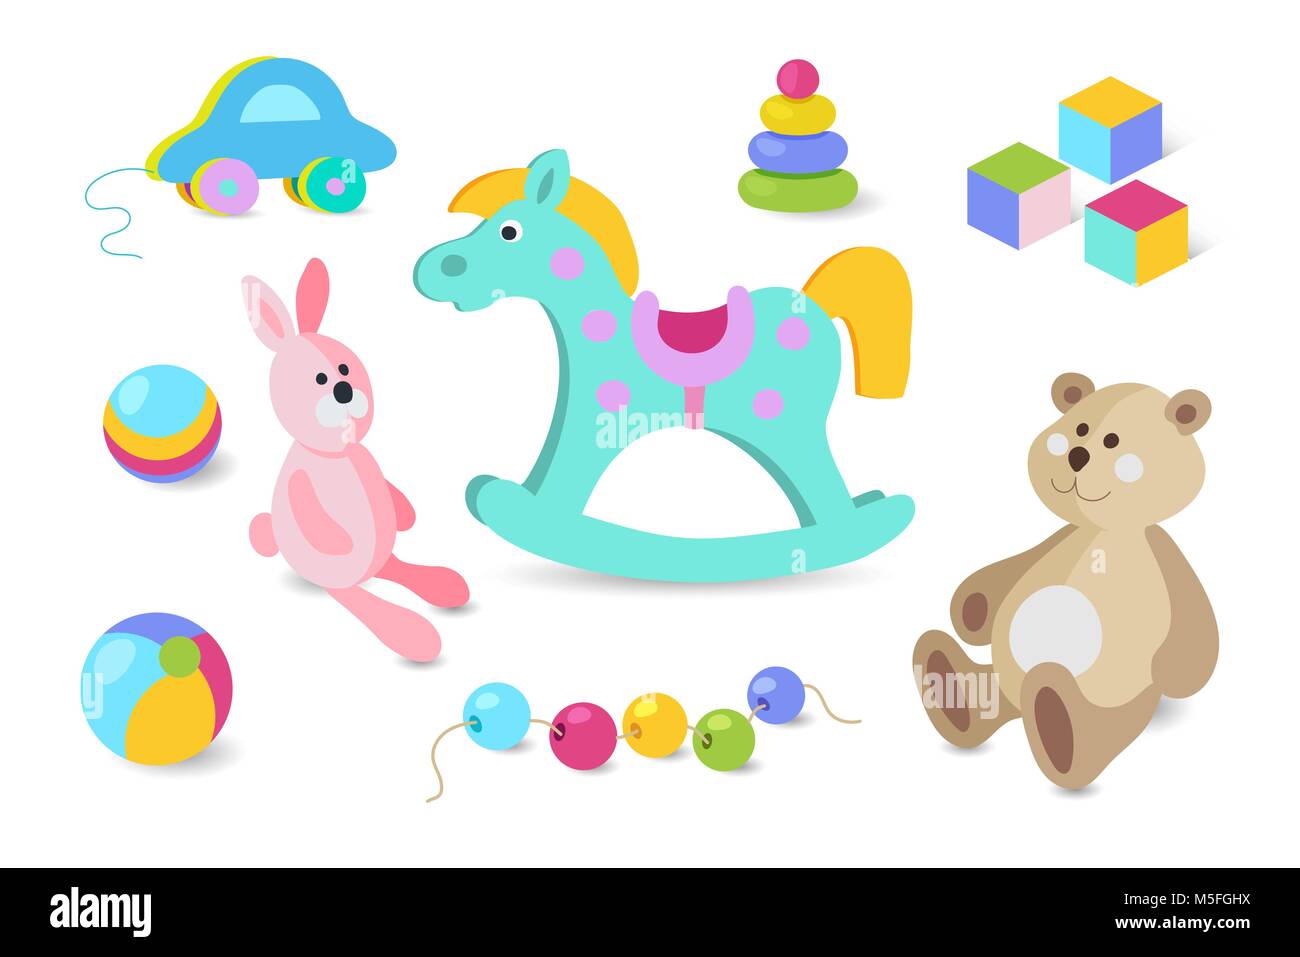 Kids toys cartoon style colorful vector icons set. Stock Vector